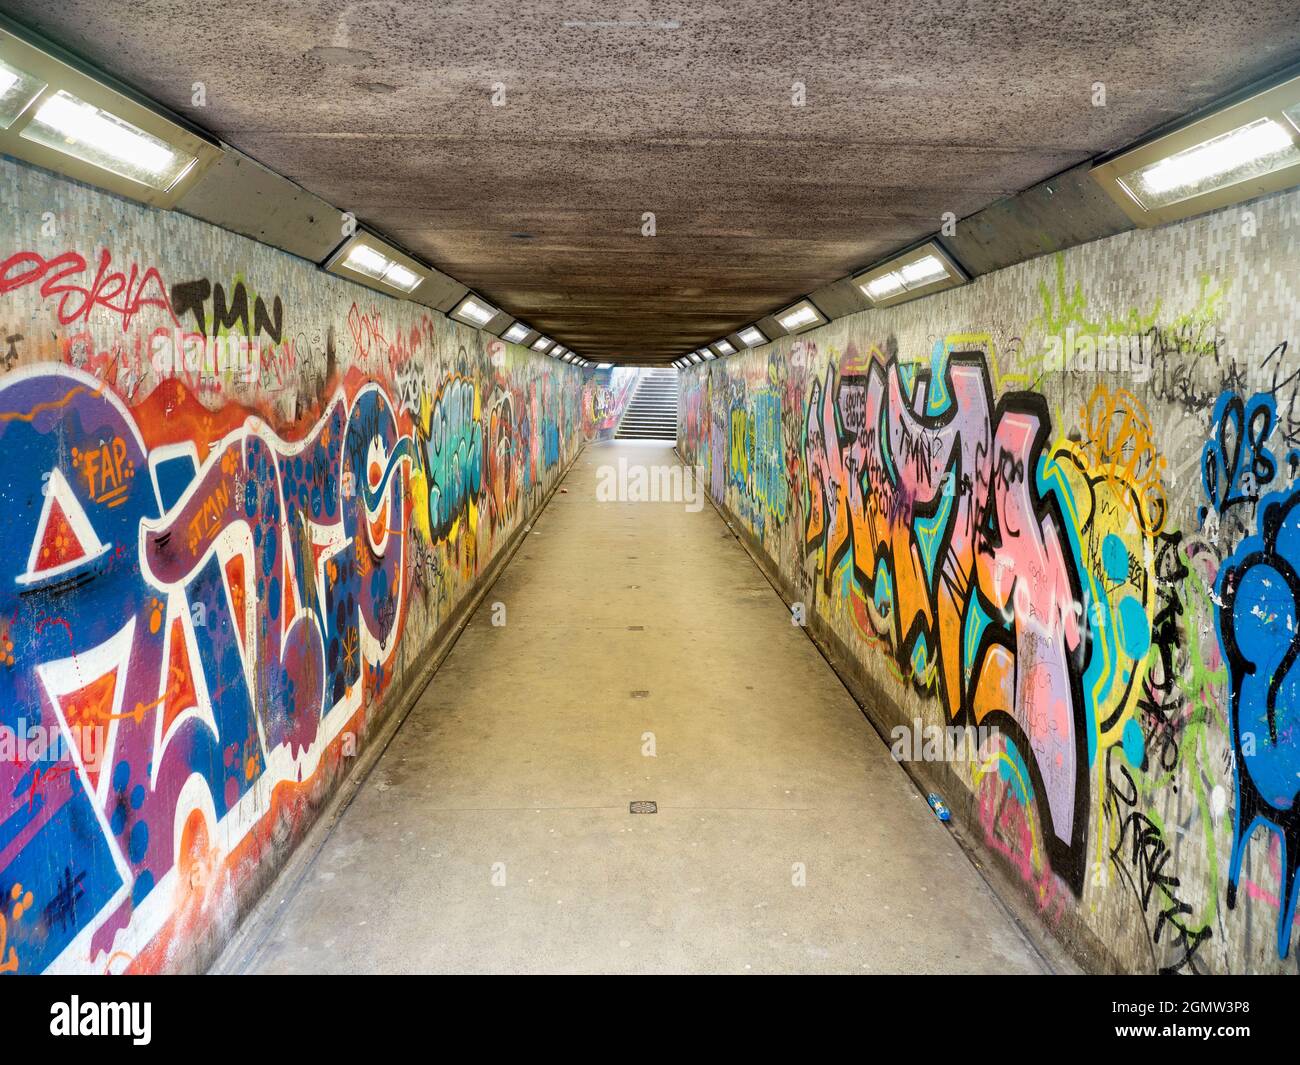 Subways in many cities are places that are dark and dangerous. But here we see one in Belfast that has been transformed by vivid, colourful graffiti i Stock Photo